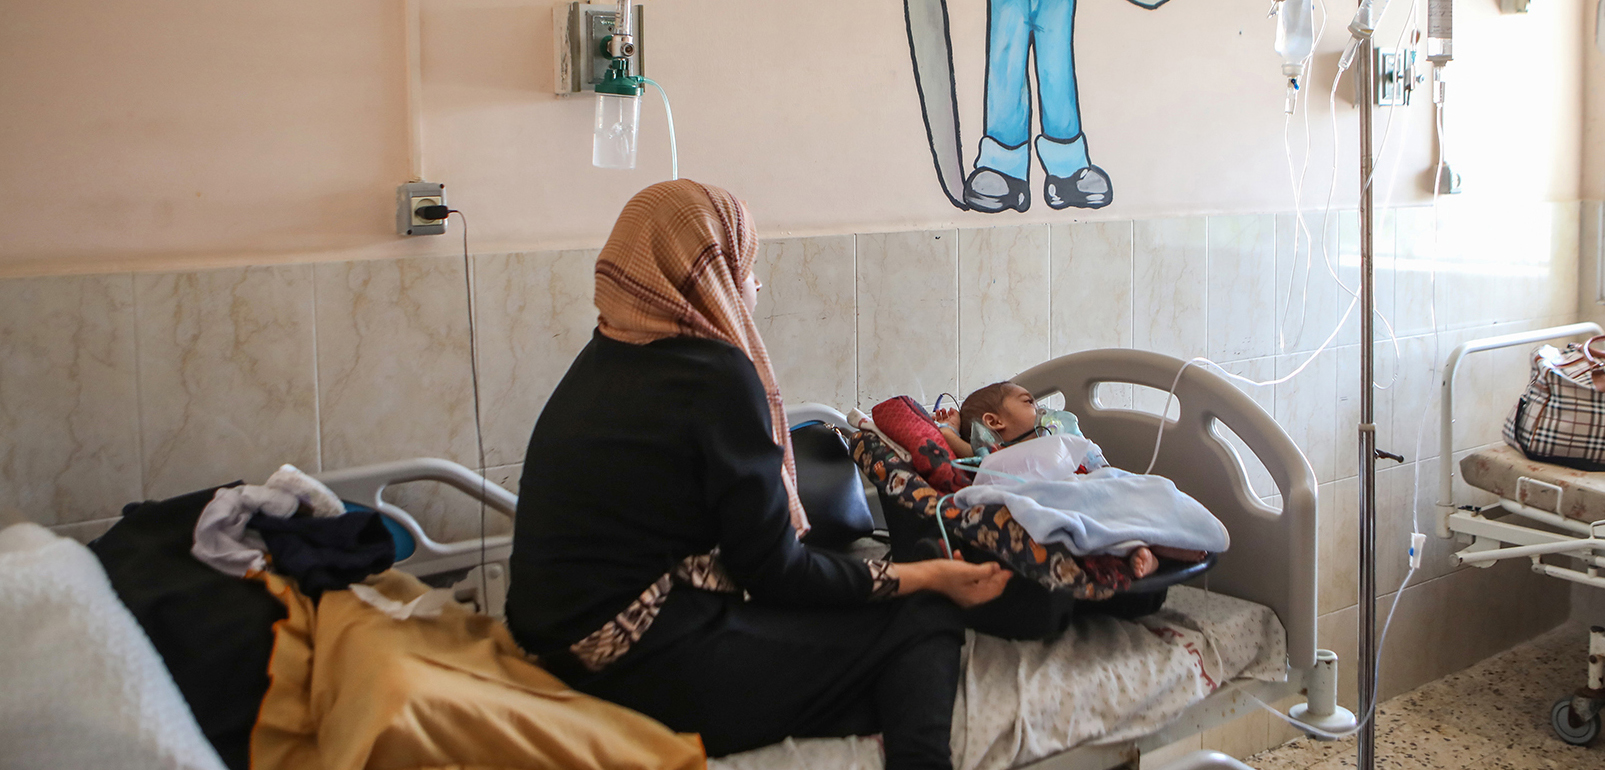 Gaza health care suffers as Palestinian factions play blame game 3